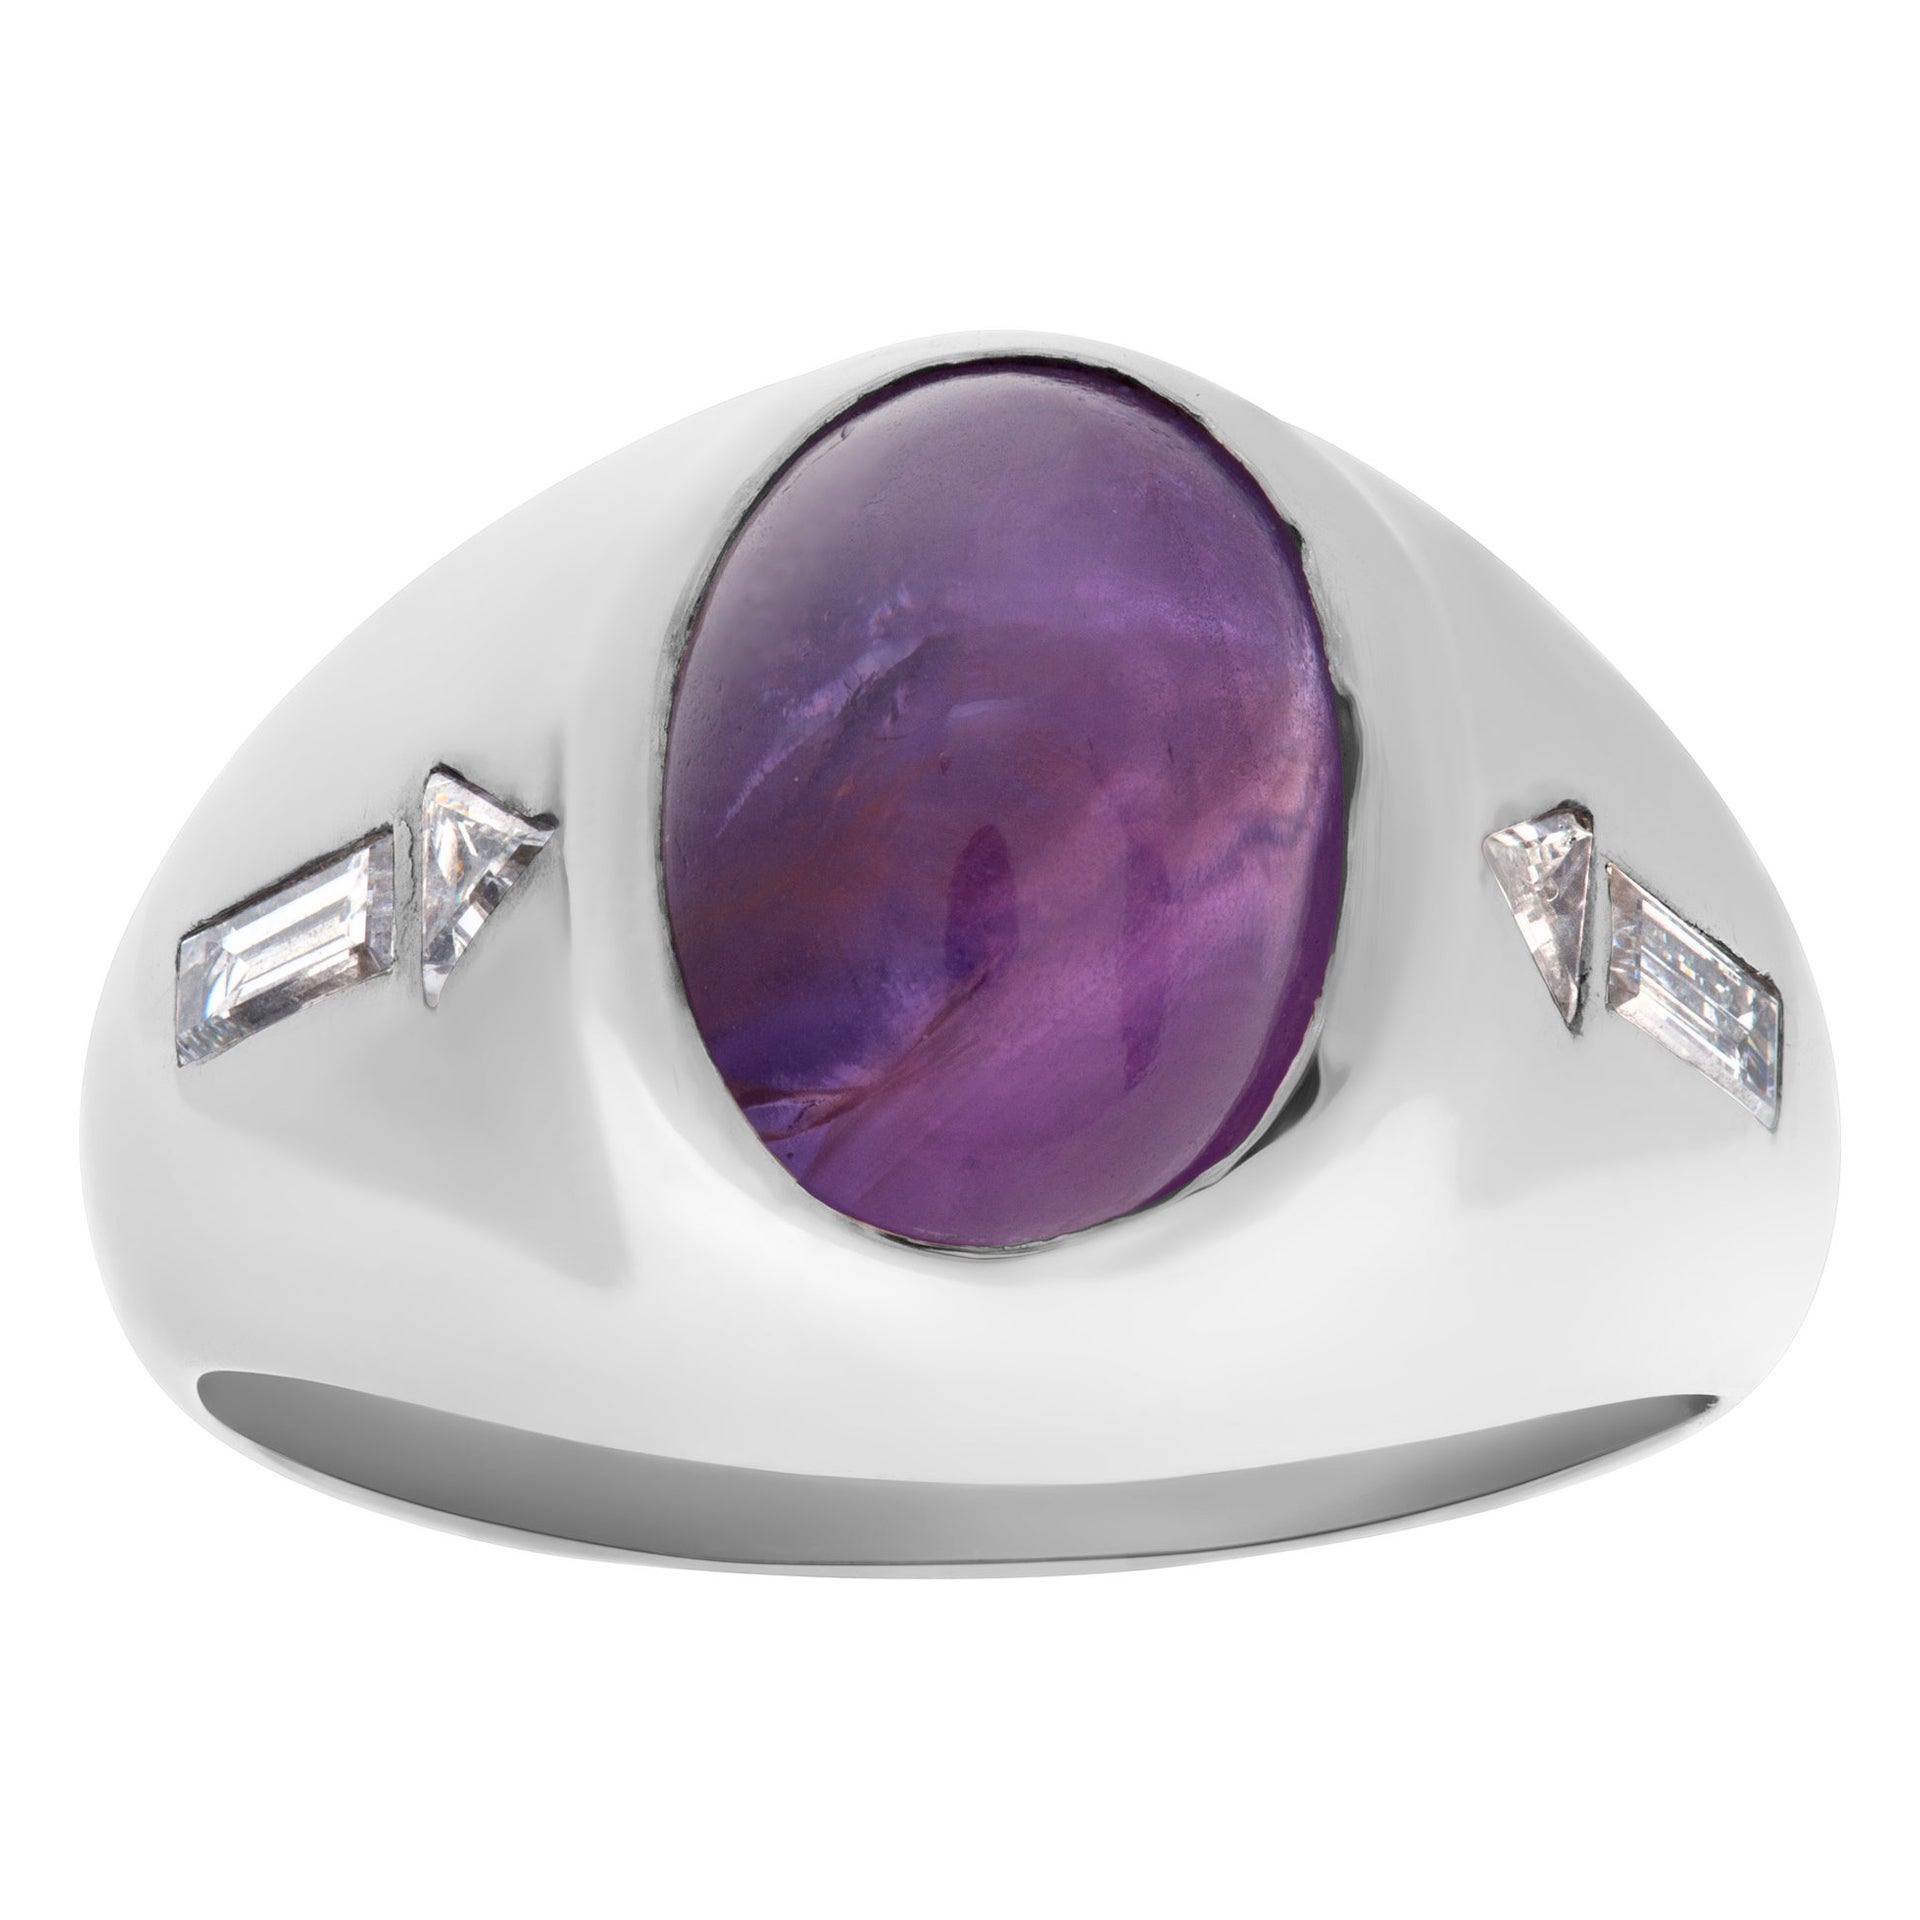 Star Sapphire Ring with Diamond Accents in 14k White Gold. 2.00 Cts Sapphire For Sale